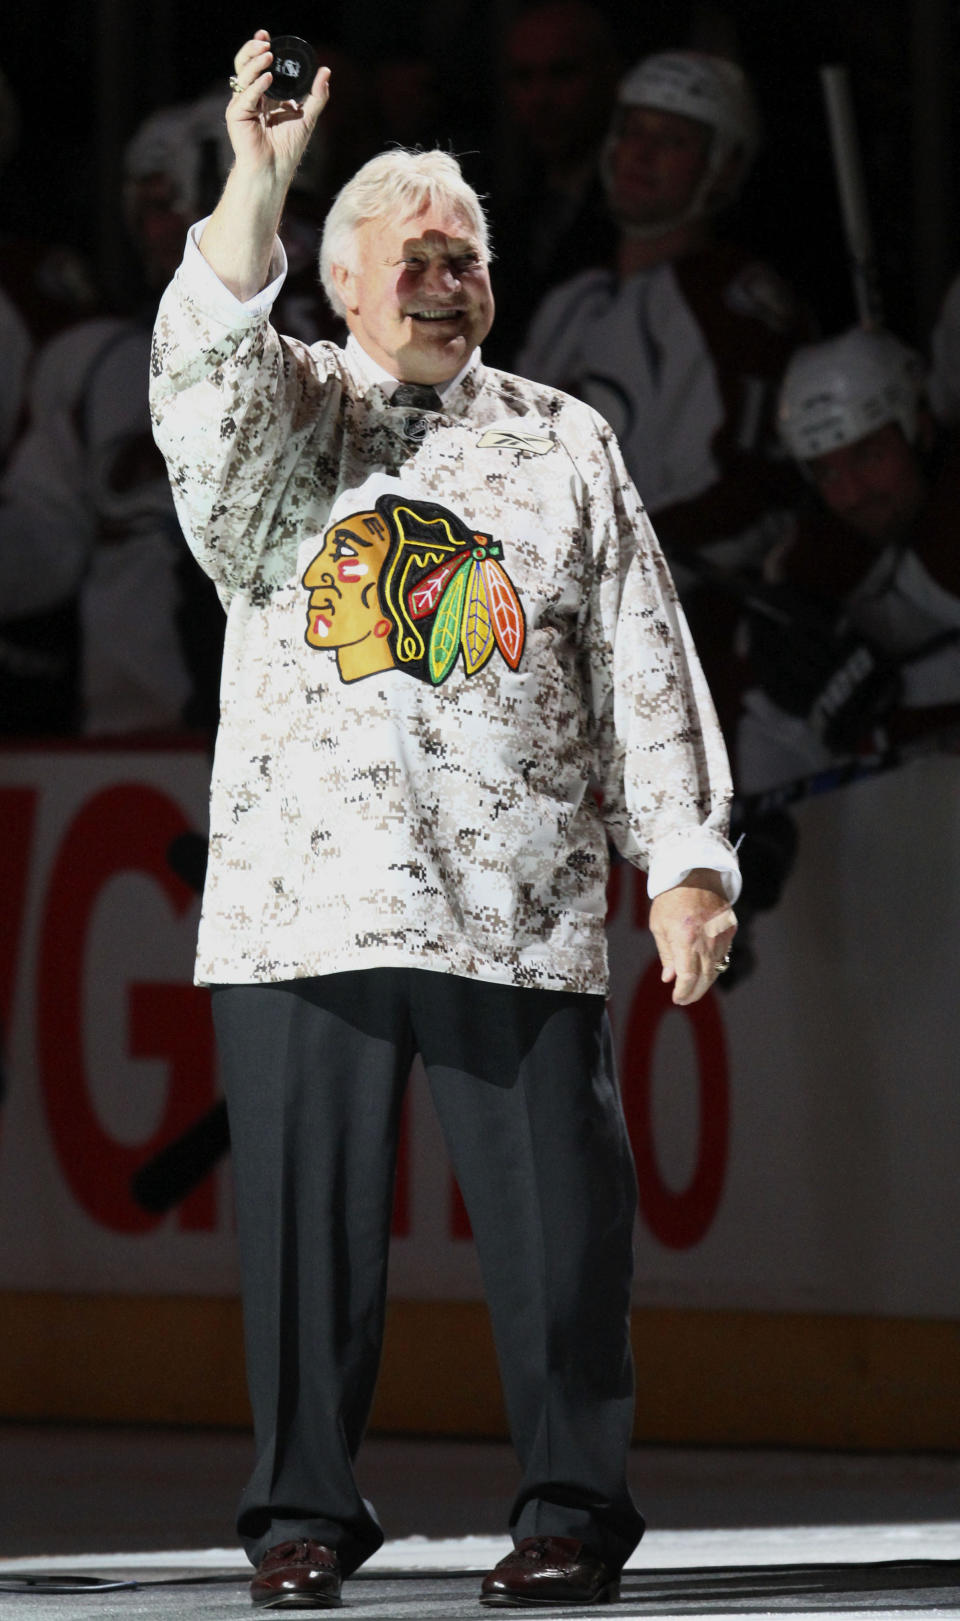 FILE - Former Chicago Blackhawks star Bobby Hull waves to fans before the NHL hockey game between the Blackhawks and the Colorado Avalanche in Chicago, Nov. 11, 2009. Hull, a Hall of Fame forward who helped the Blackhawks win the 1961 Stanley Cup Final, has died. He was 84. The Blackhawks and the NHL Alumni Association announced the death of the two-time NHL MVP on Monday, Jan. 30, 2023. (AP Photo/Nam Y. Huh, file)